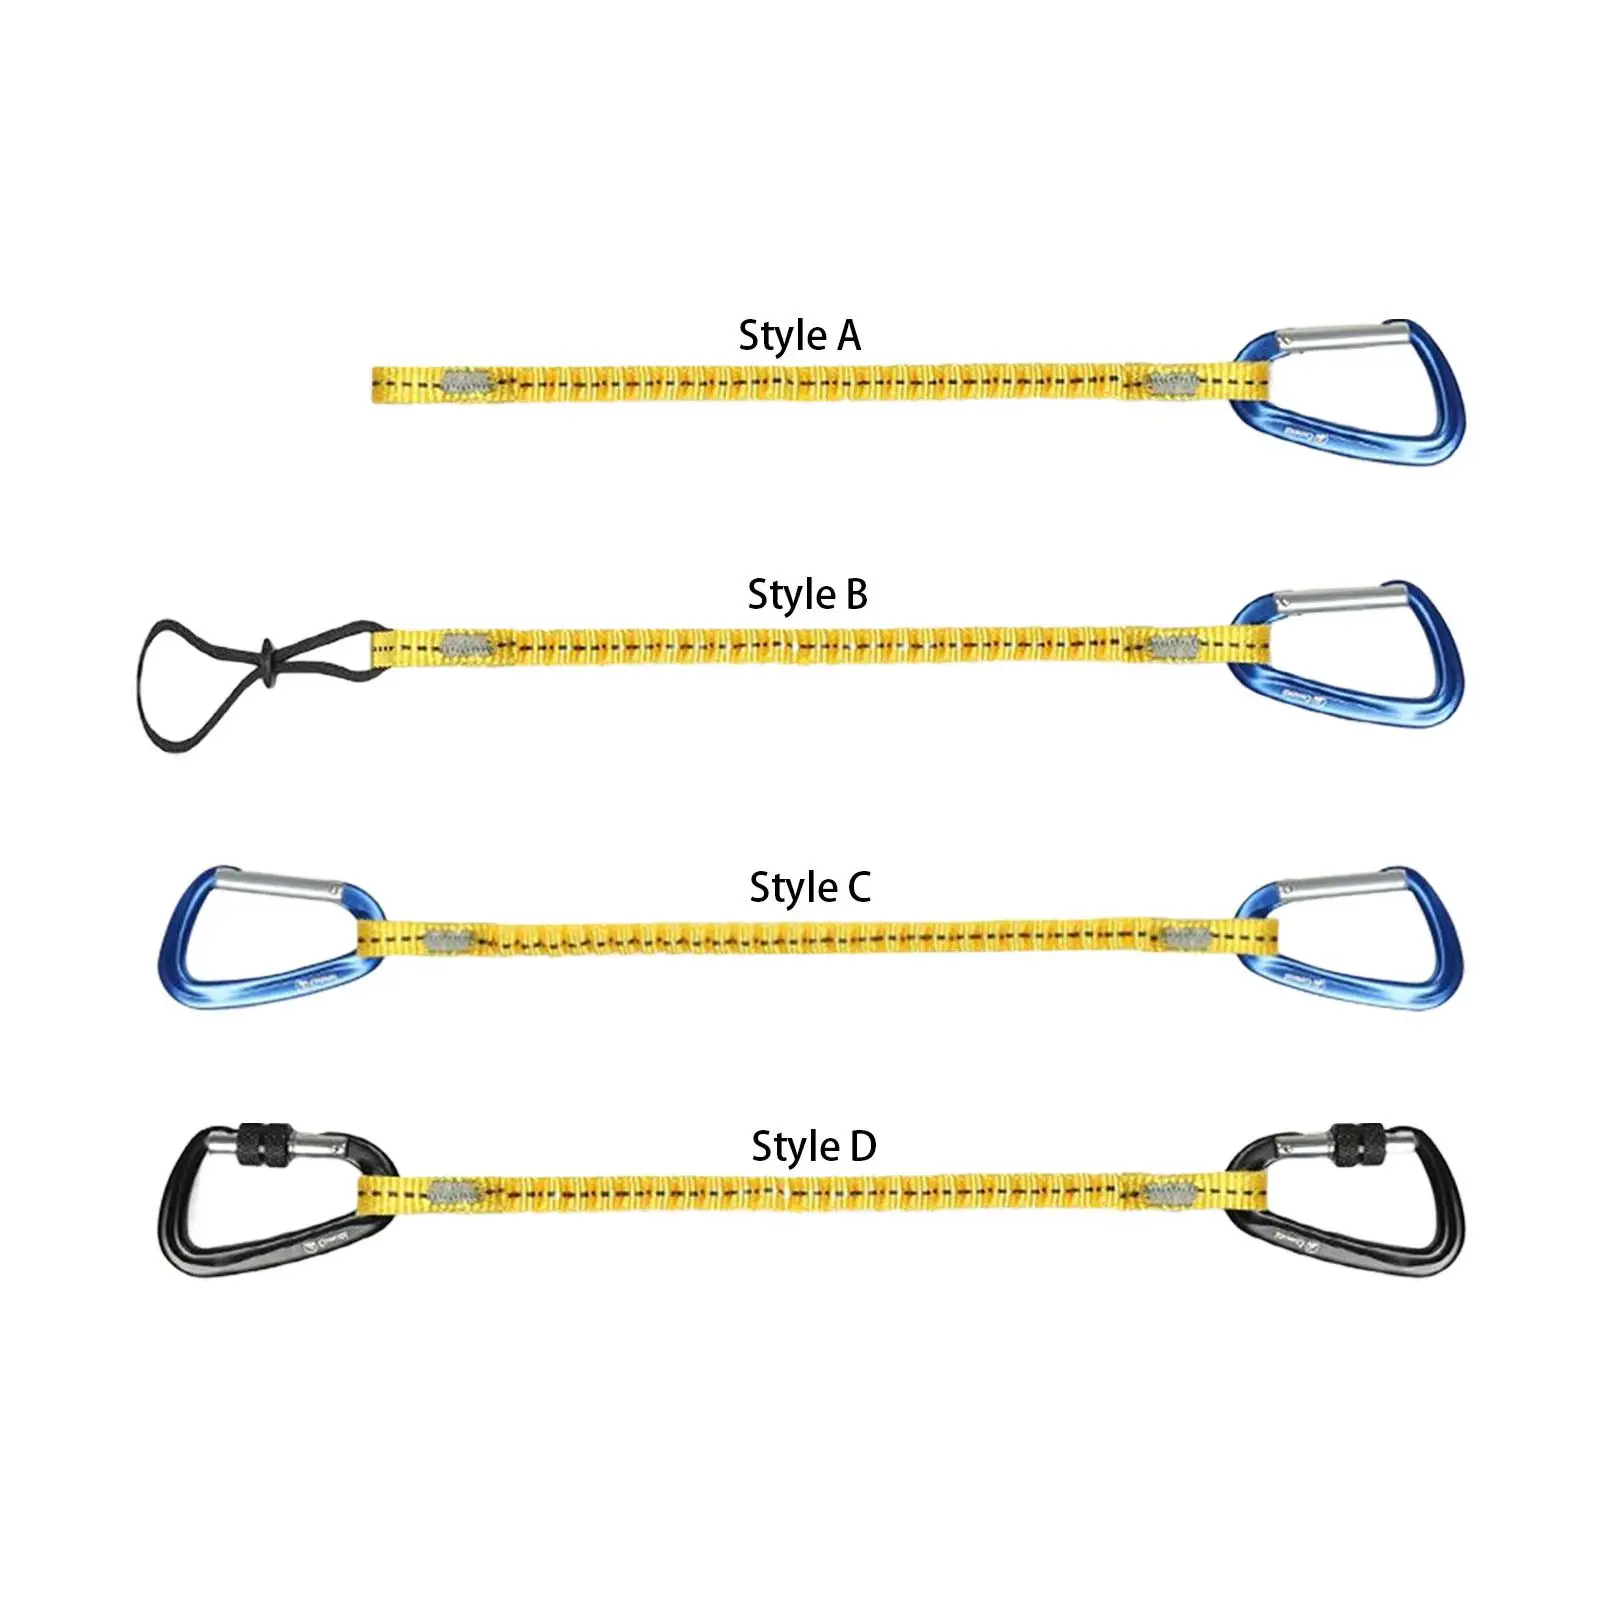 Tool Lanyard with Aluminum Alloy Carabiner High Strength Tool Tether for Rappelling Outdoor Climbing Camping Outdoor Sports